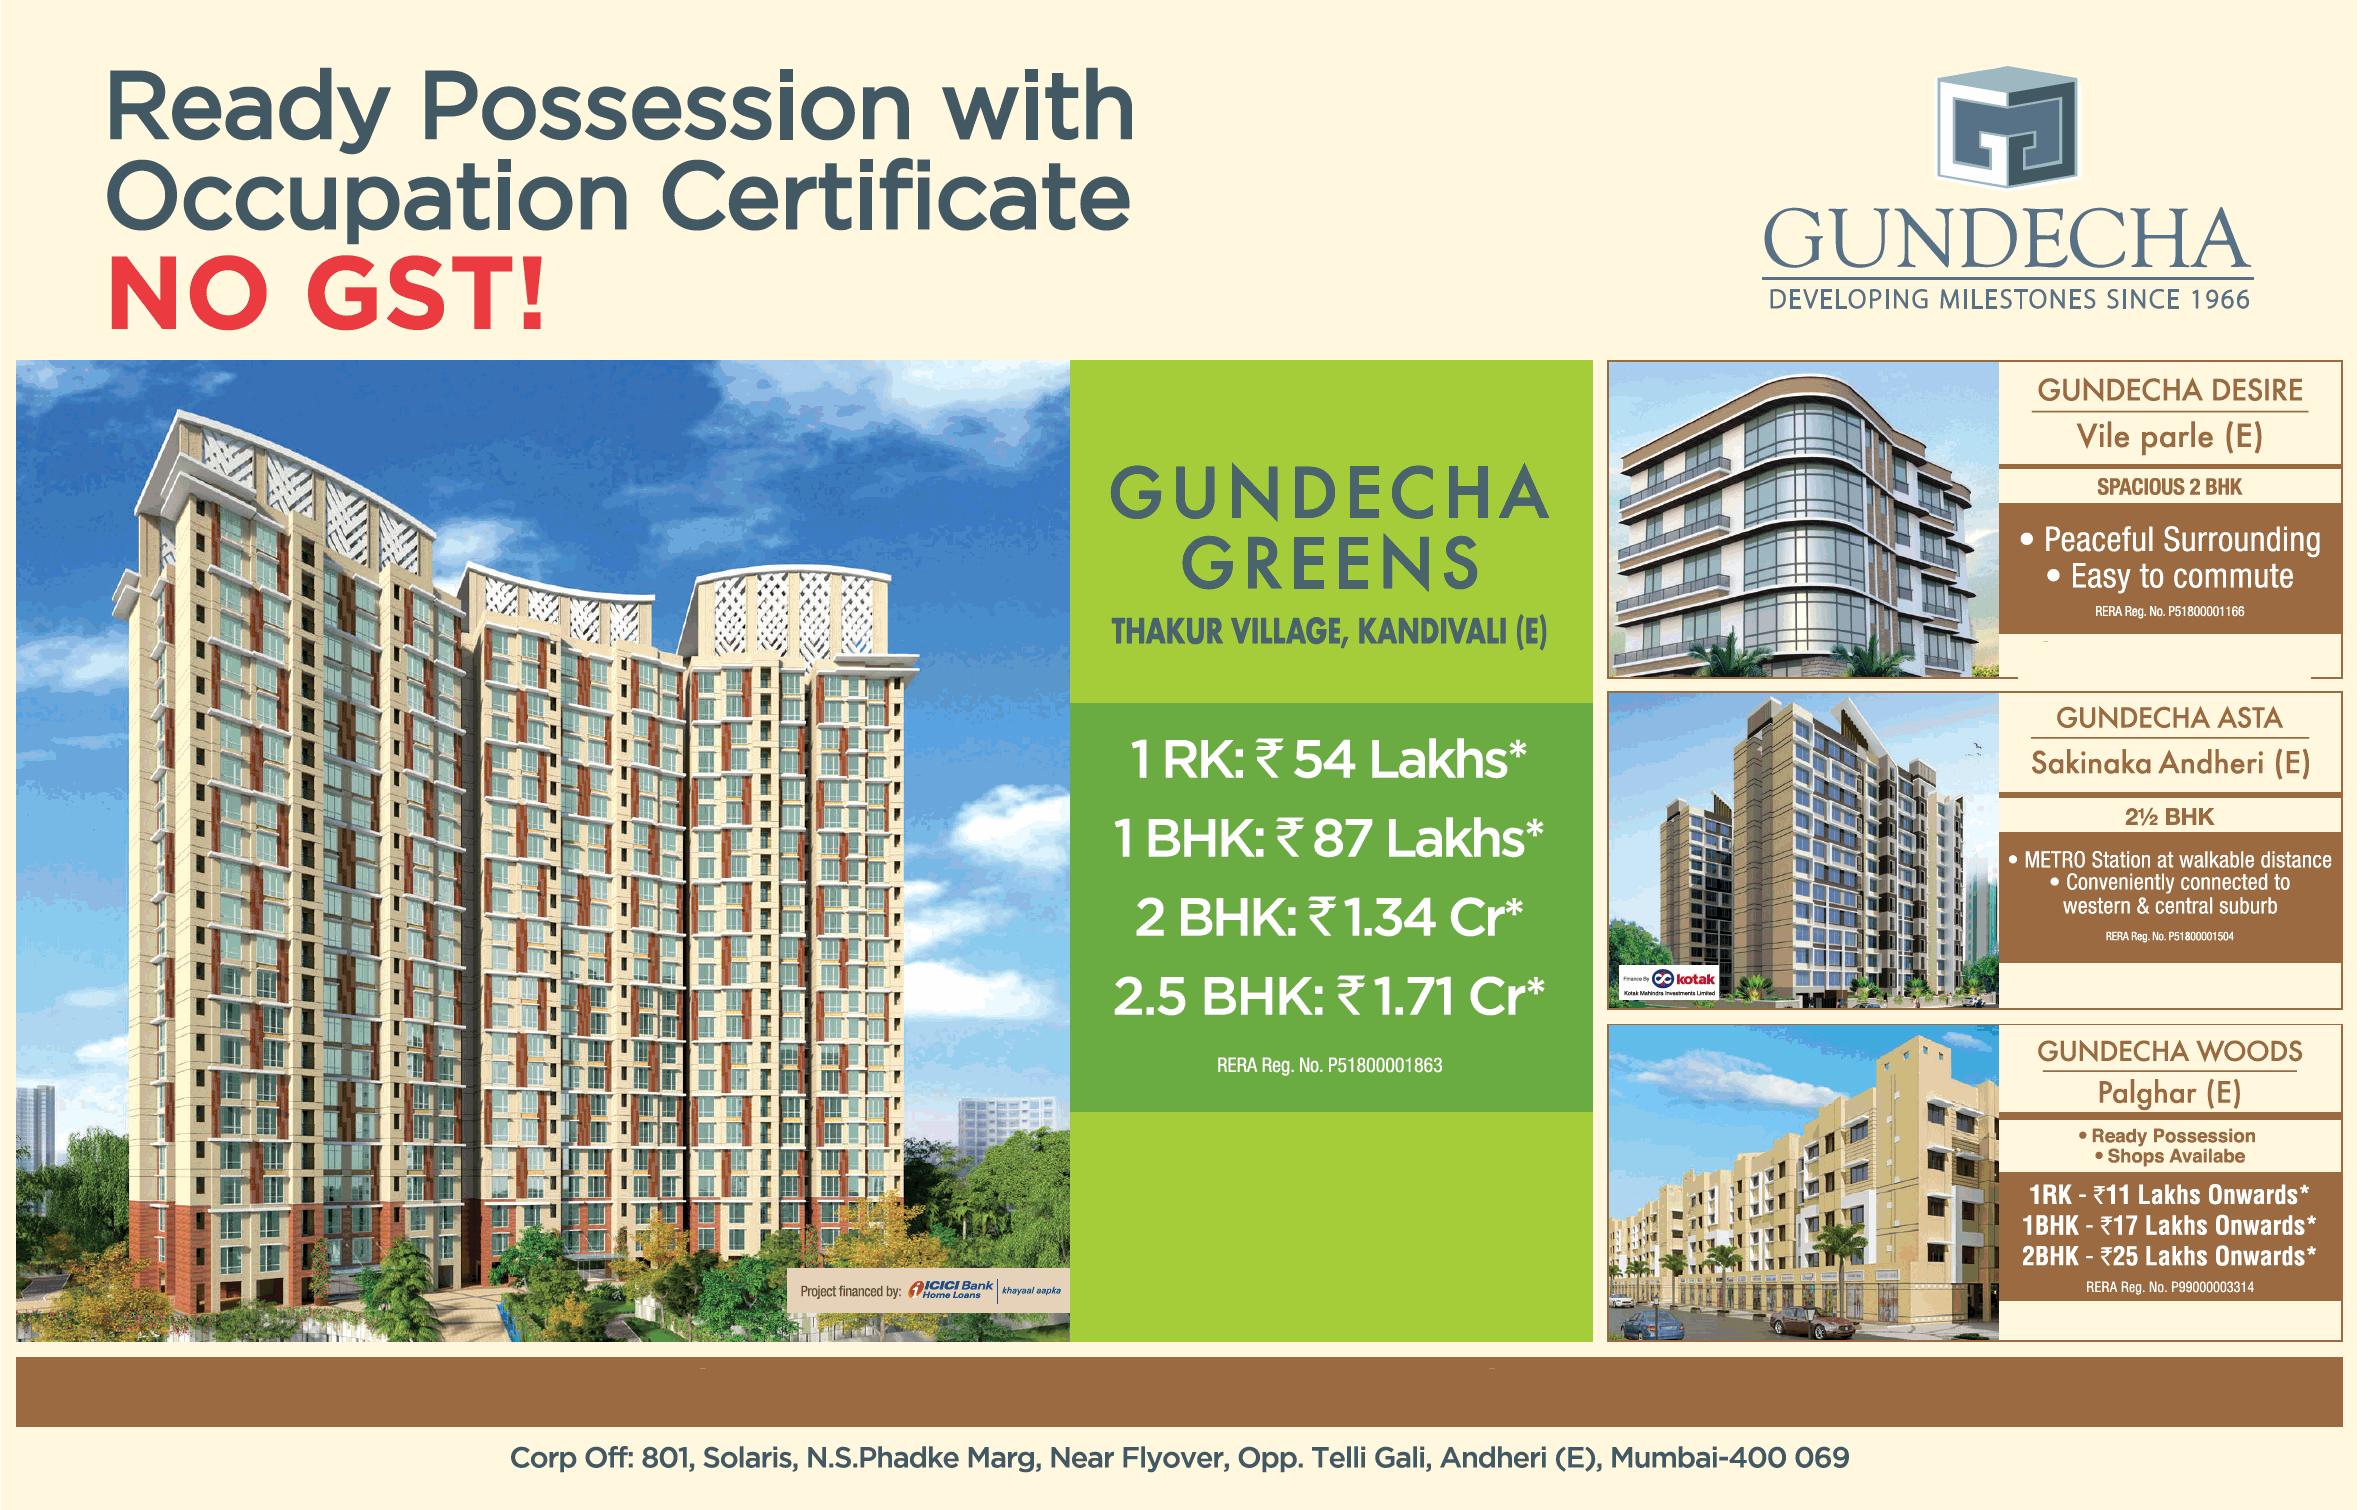 Ready possession with occupation certificate no GST at Gundecha Greens, Mumbai